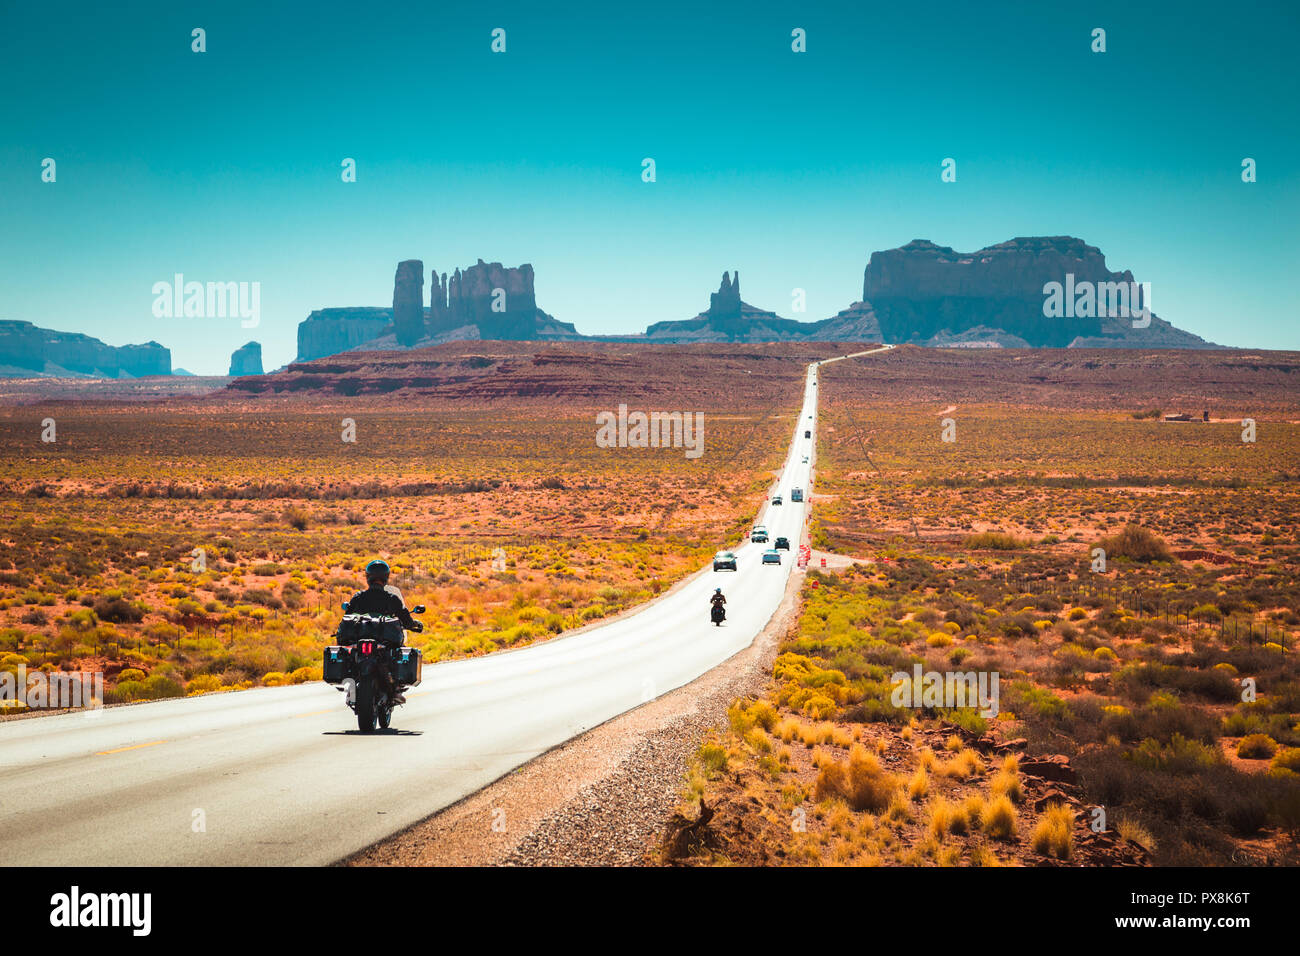 Classic panorama view of motorcyclist on historic U.S. Route 163 running through famous Monument Valley in beautiful golden evening light at sunset in Stock Photo